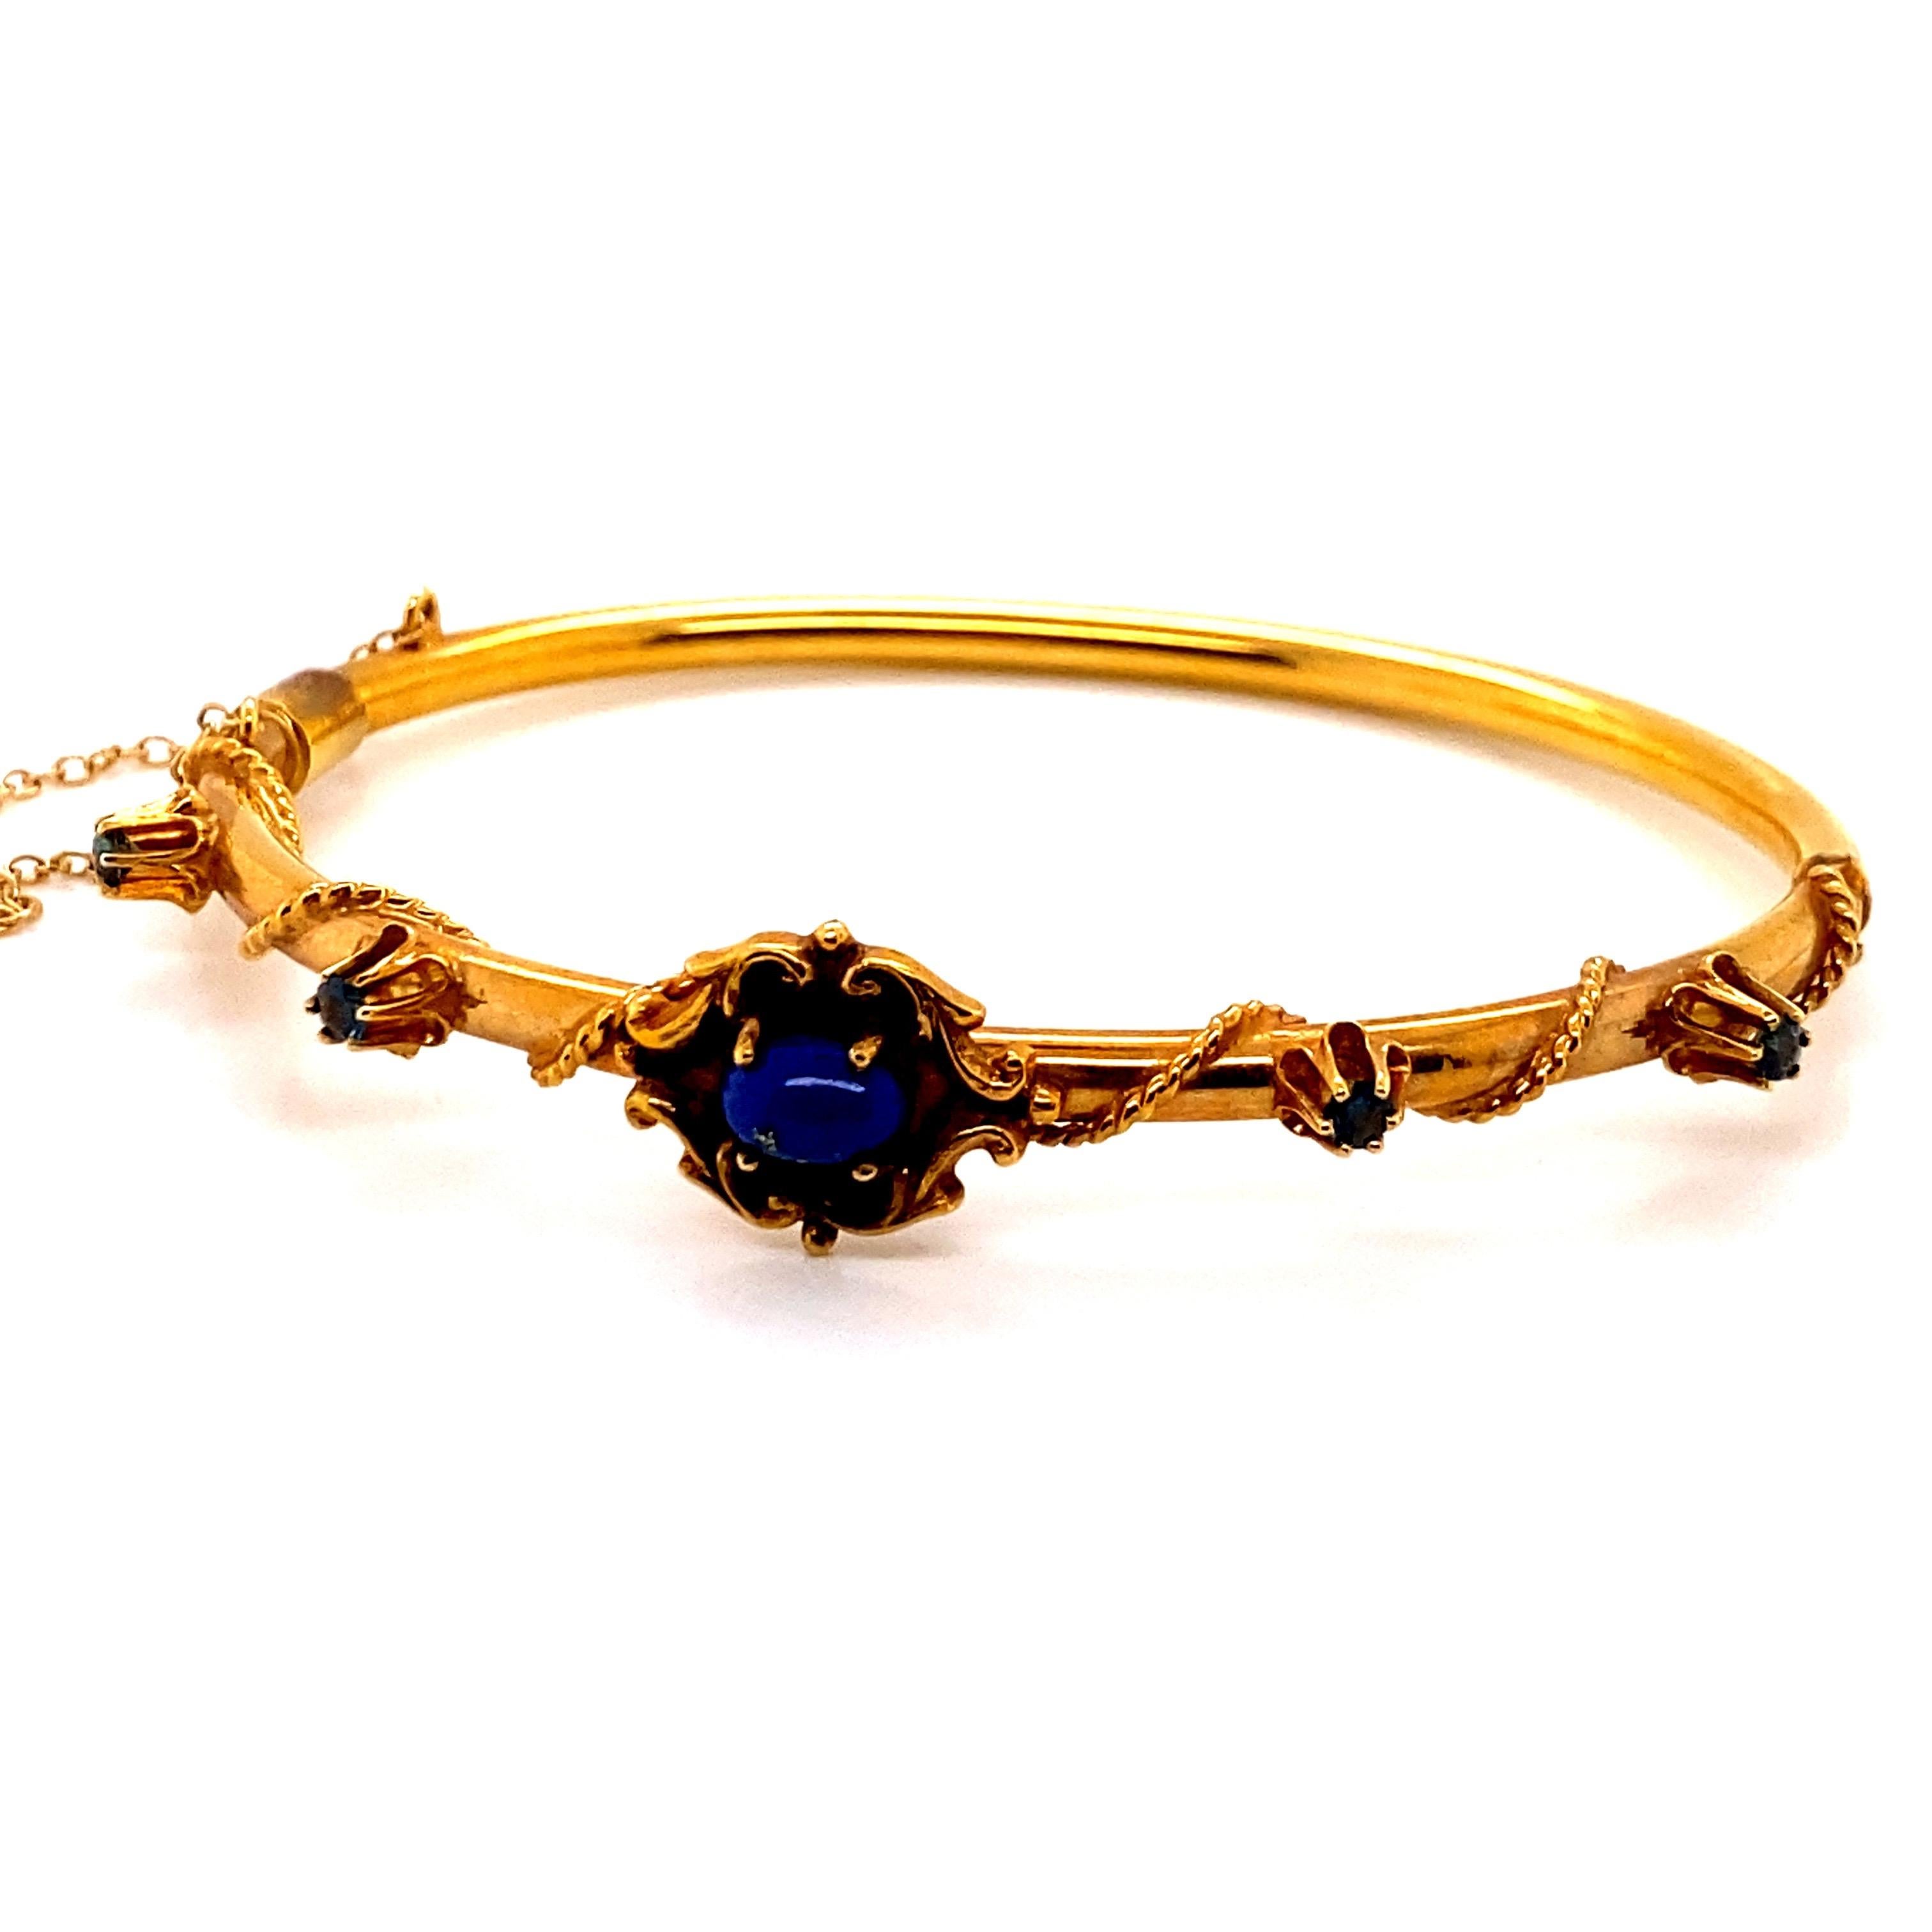 Vintage 14K Yellow Gold Bangle with Lapis and Sapphires - The center stone is Lapis and measures 7 x 4.8mm. There are 4 round sapphires that weigh approximately .40ct total weight. The width of the bangle is 3.5mm. The bracelet weighs 12.72 grams.